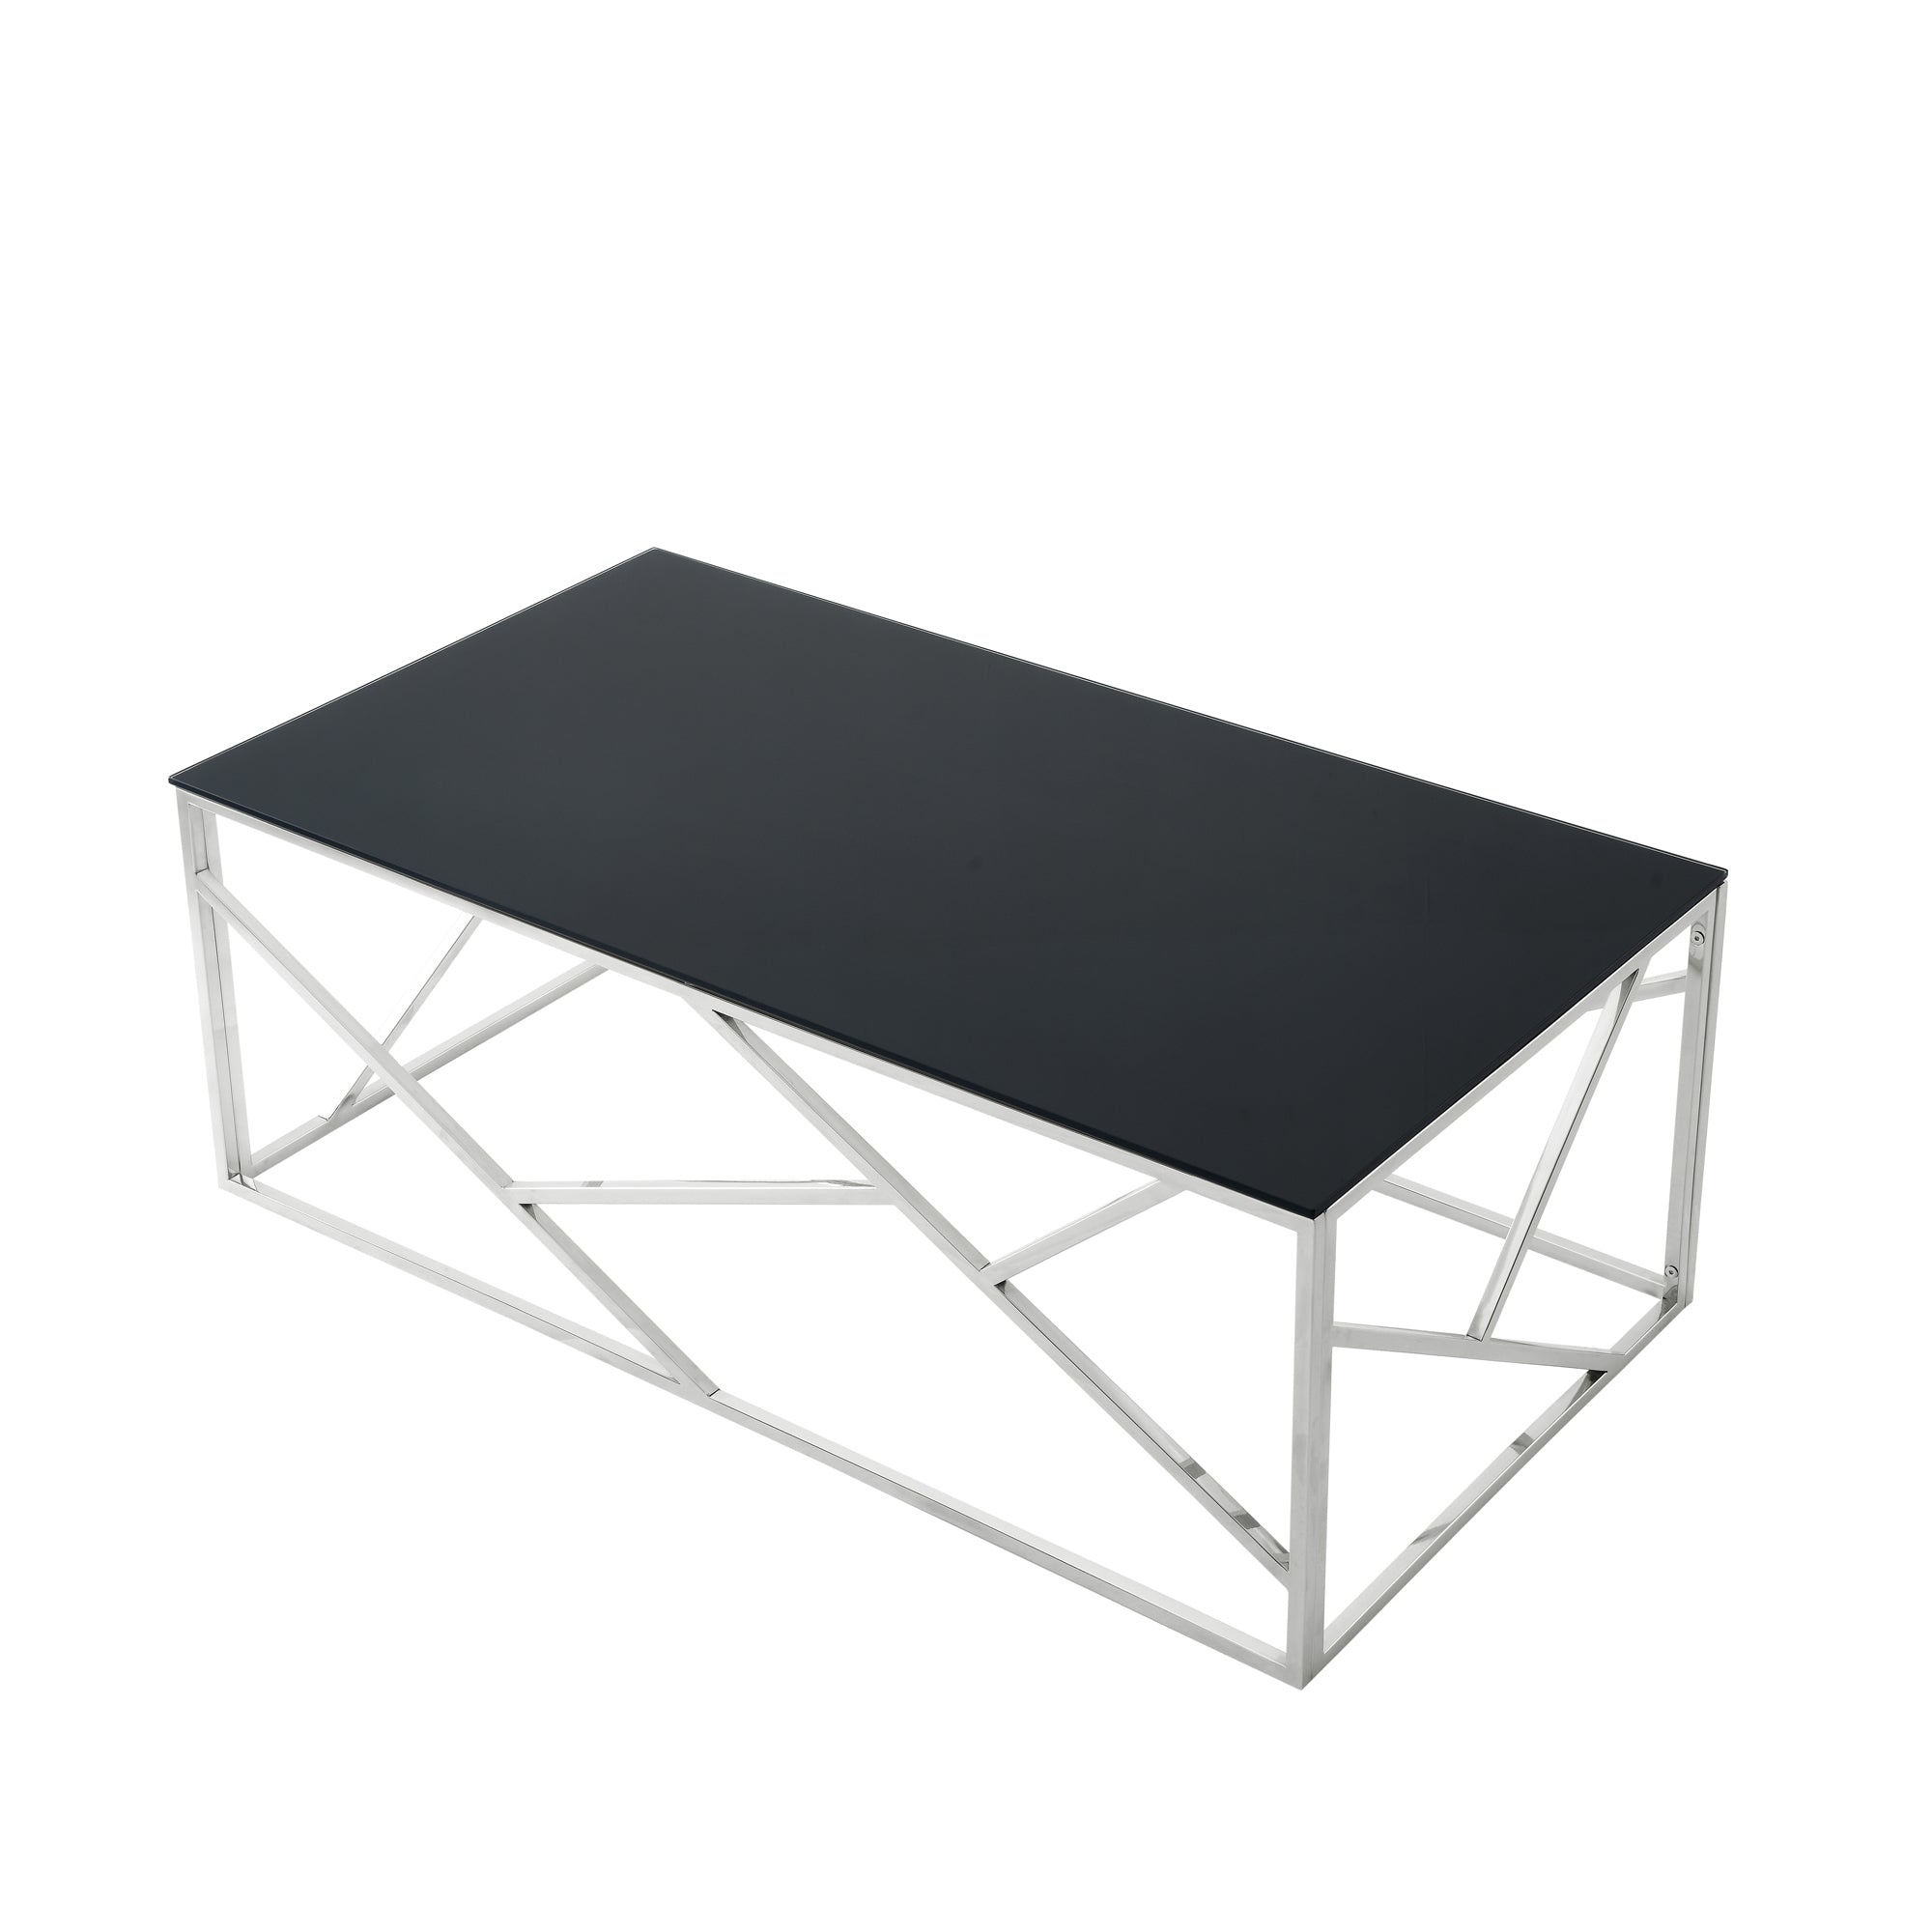 Modern Rectangular Coffee Accent Table with Black Tempered Glass Top and Stainless Steel Frame - Polished Chrome